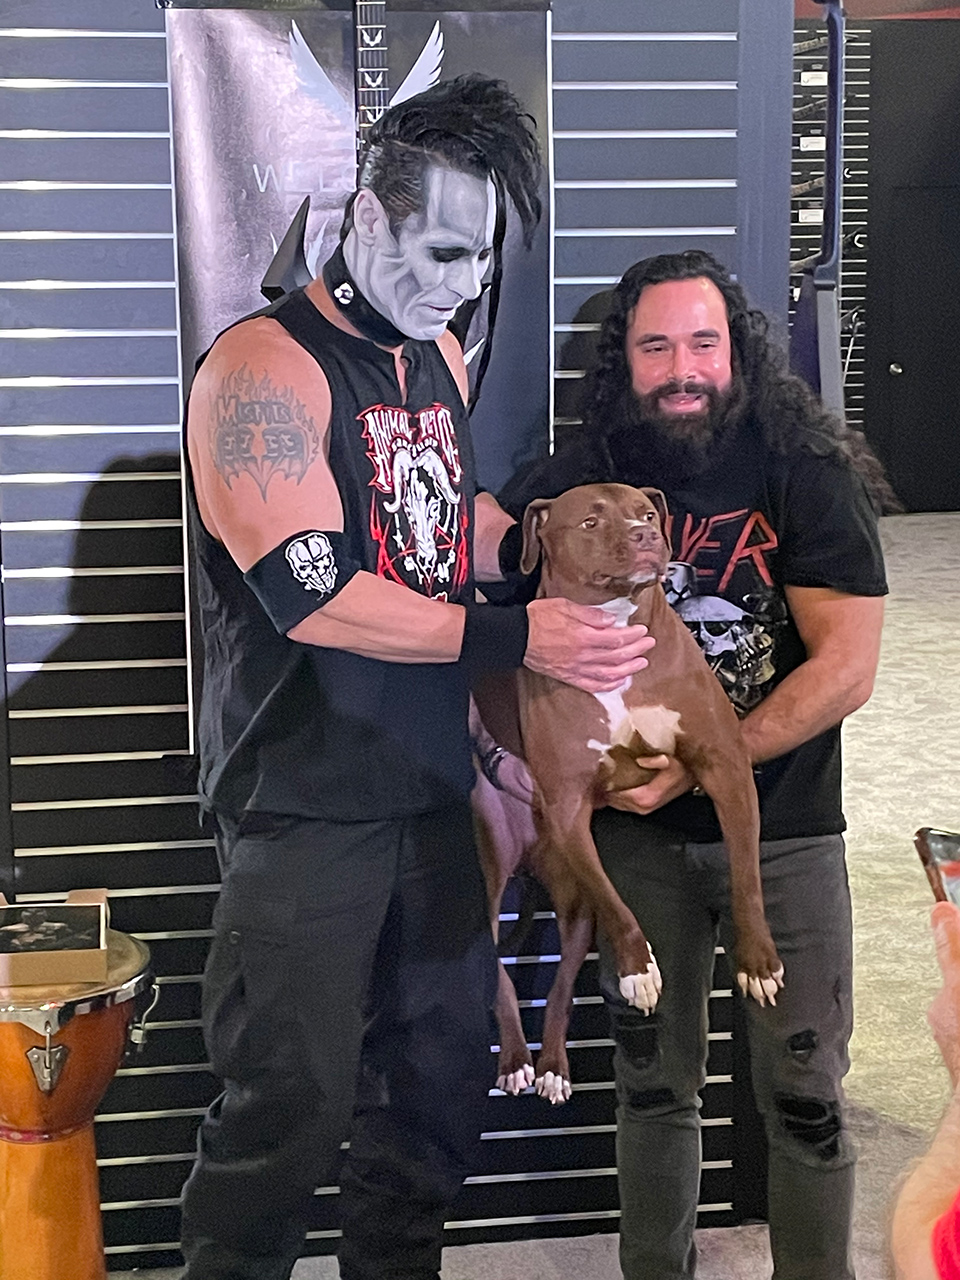 Misfits guitarist Doyle Wolfgang von Frankenstein with Dean CEO Evan Rubinson and Evan's dog, who is apparently a big Misfits fan.